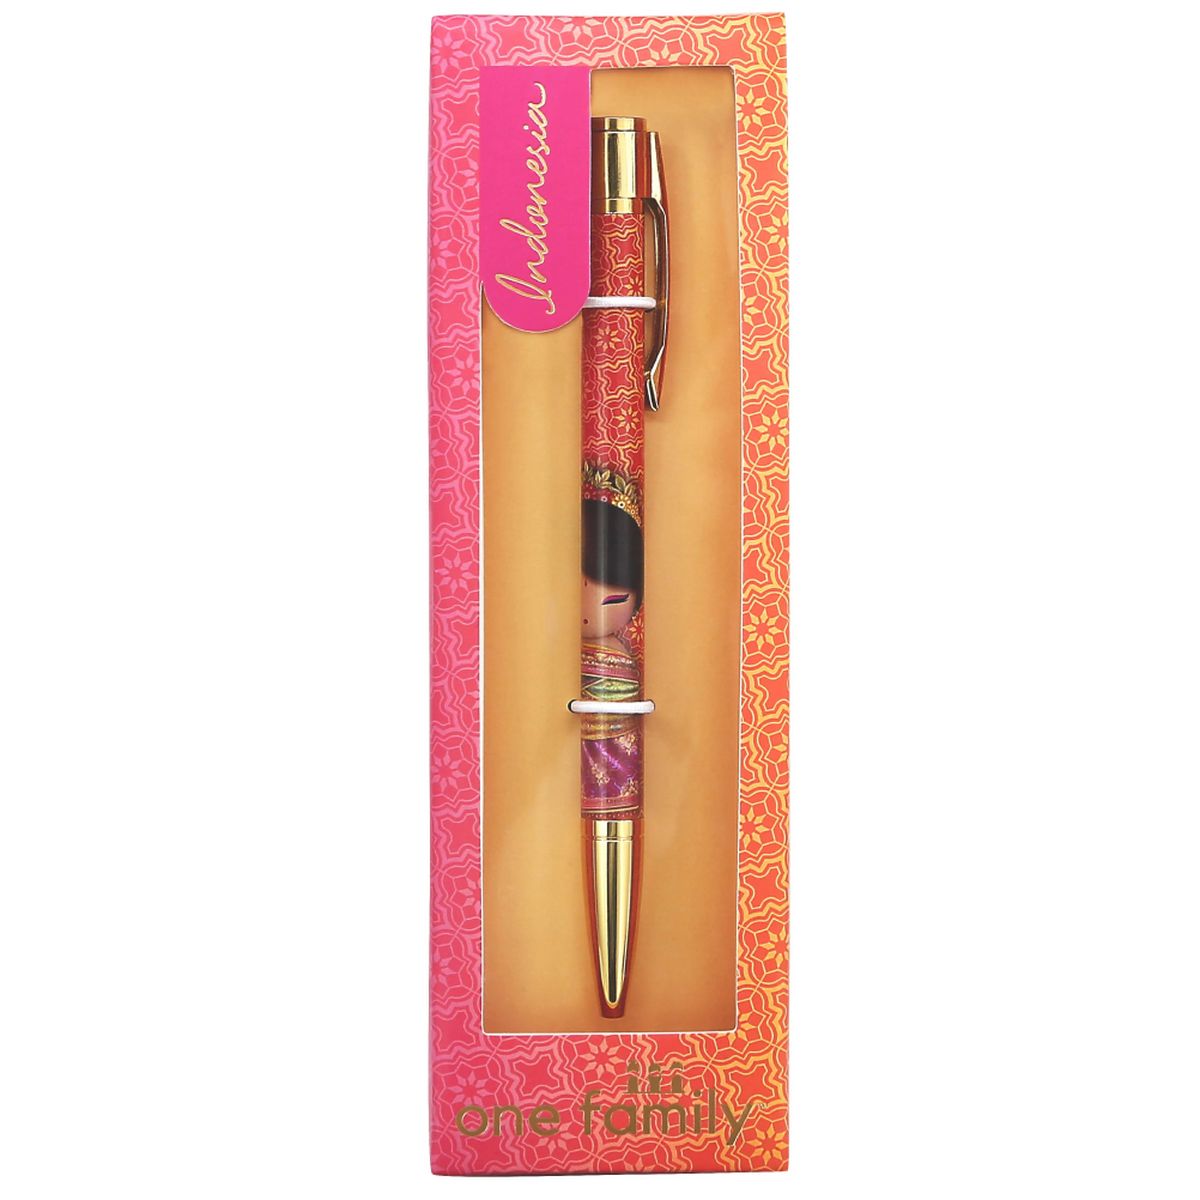 Indonesia - Gift Box Pen - ONE FAMILY